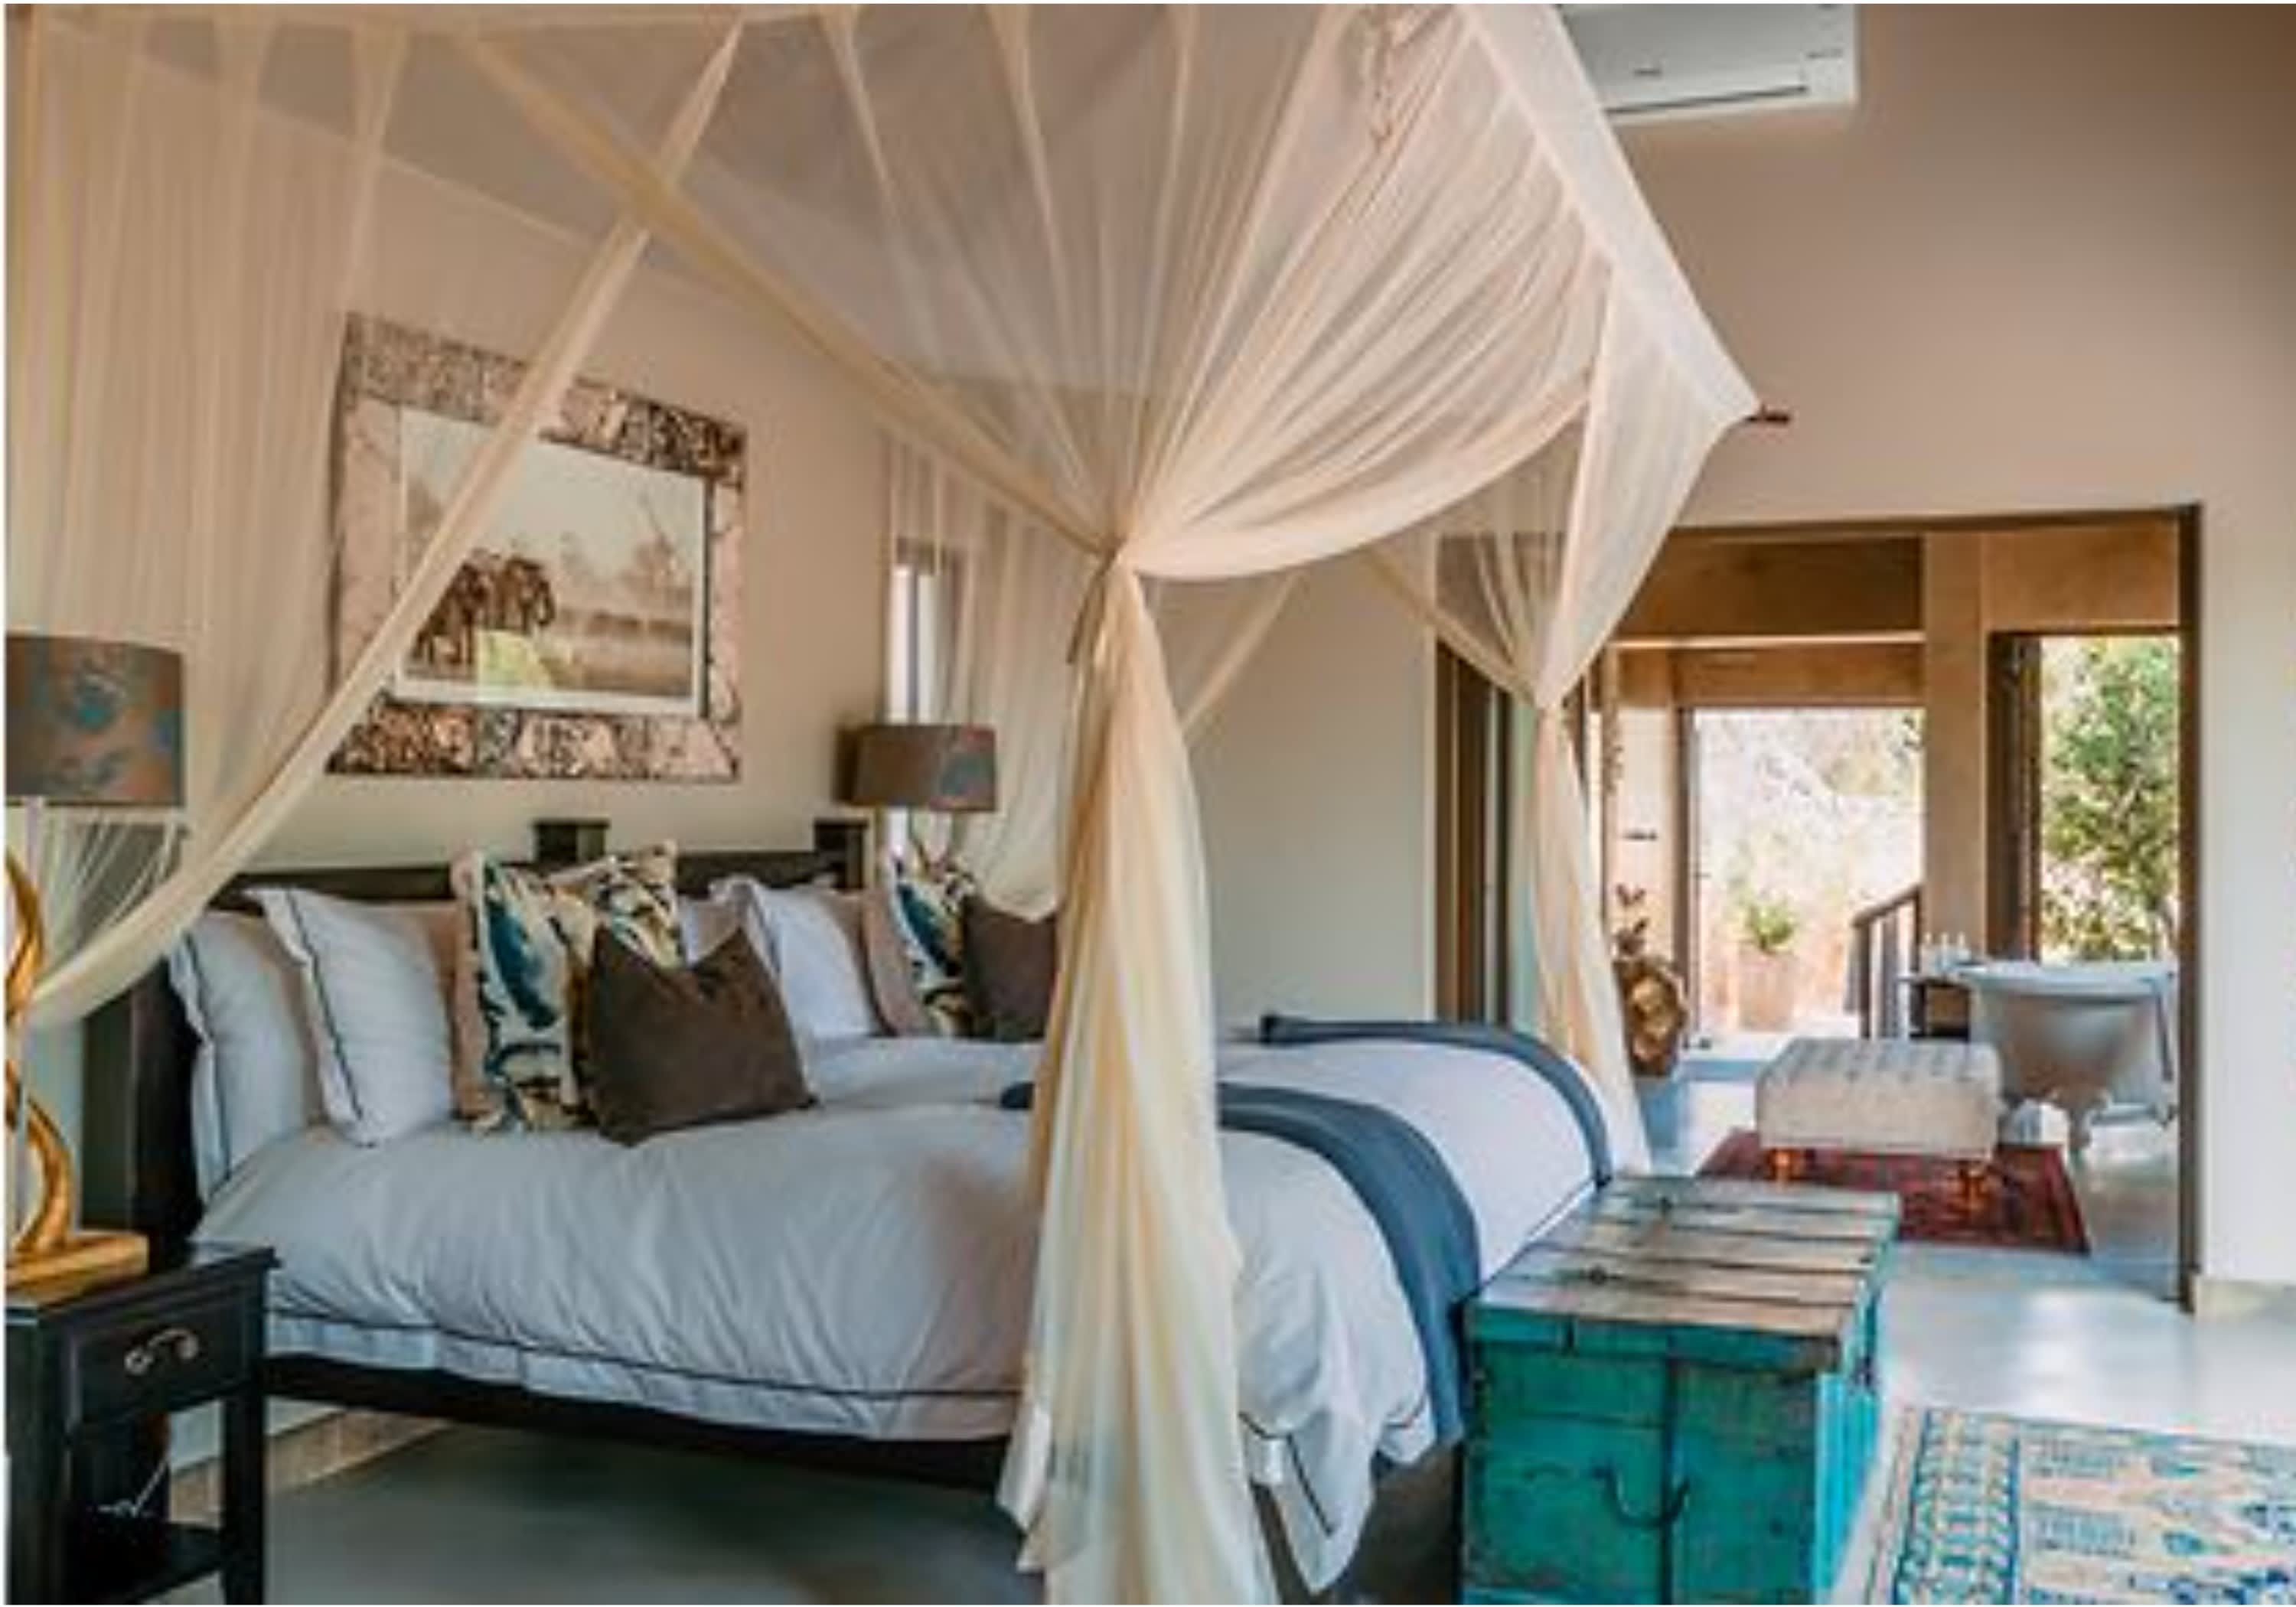 SIVITI TIMBAVATI PLAINS, Greater Kruger National Park - 1 Night LUXURY Stay for 2 in a Suite - All Meals + 2 Game Drives from R14 149,99 Per Person Per Night!